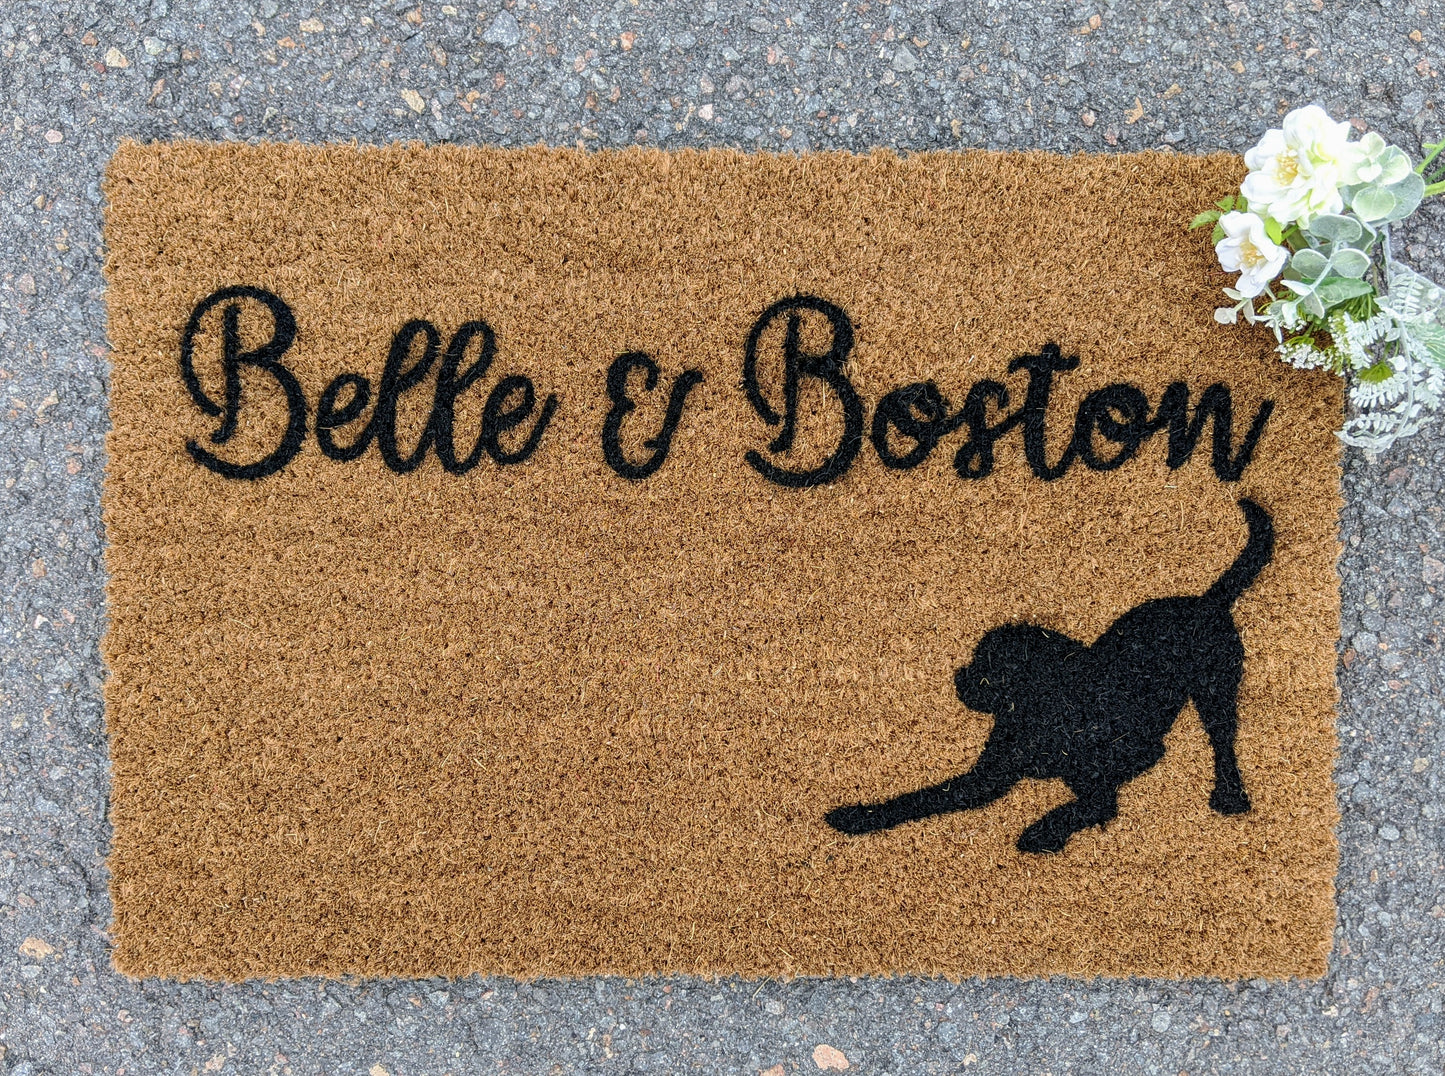 Personalised welcome mat with a dog picture - Personalised Doormat Australia